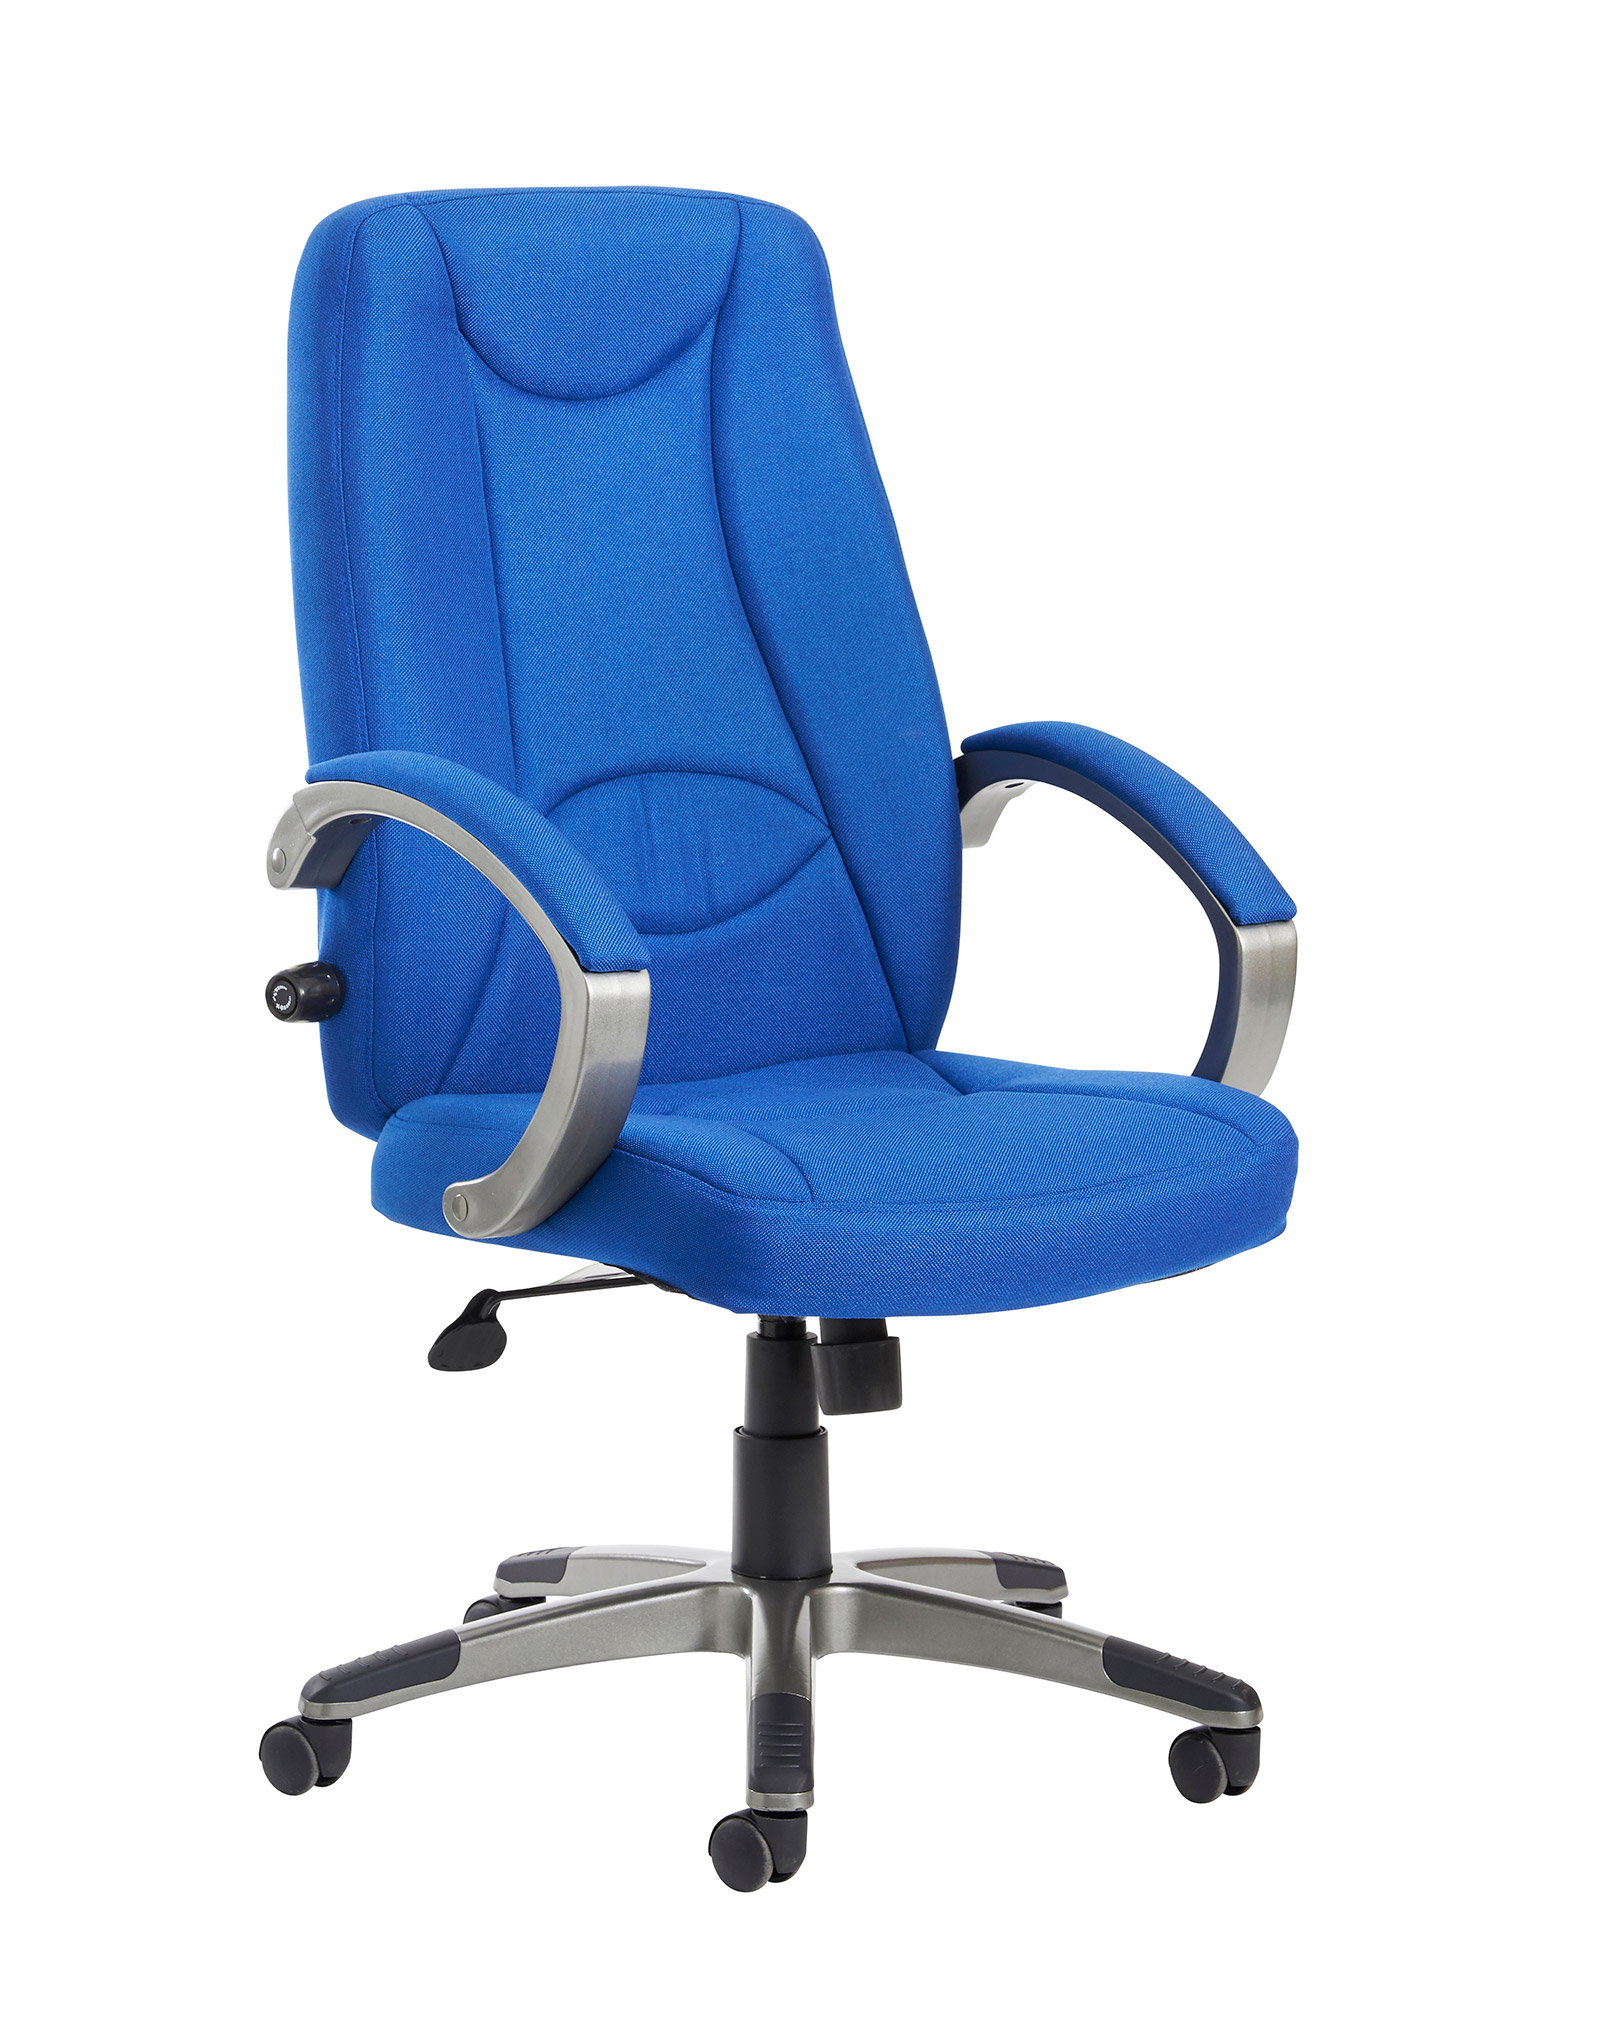 Office Manager Chair